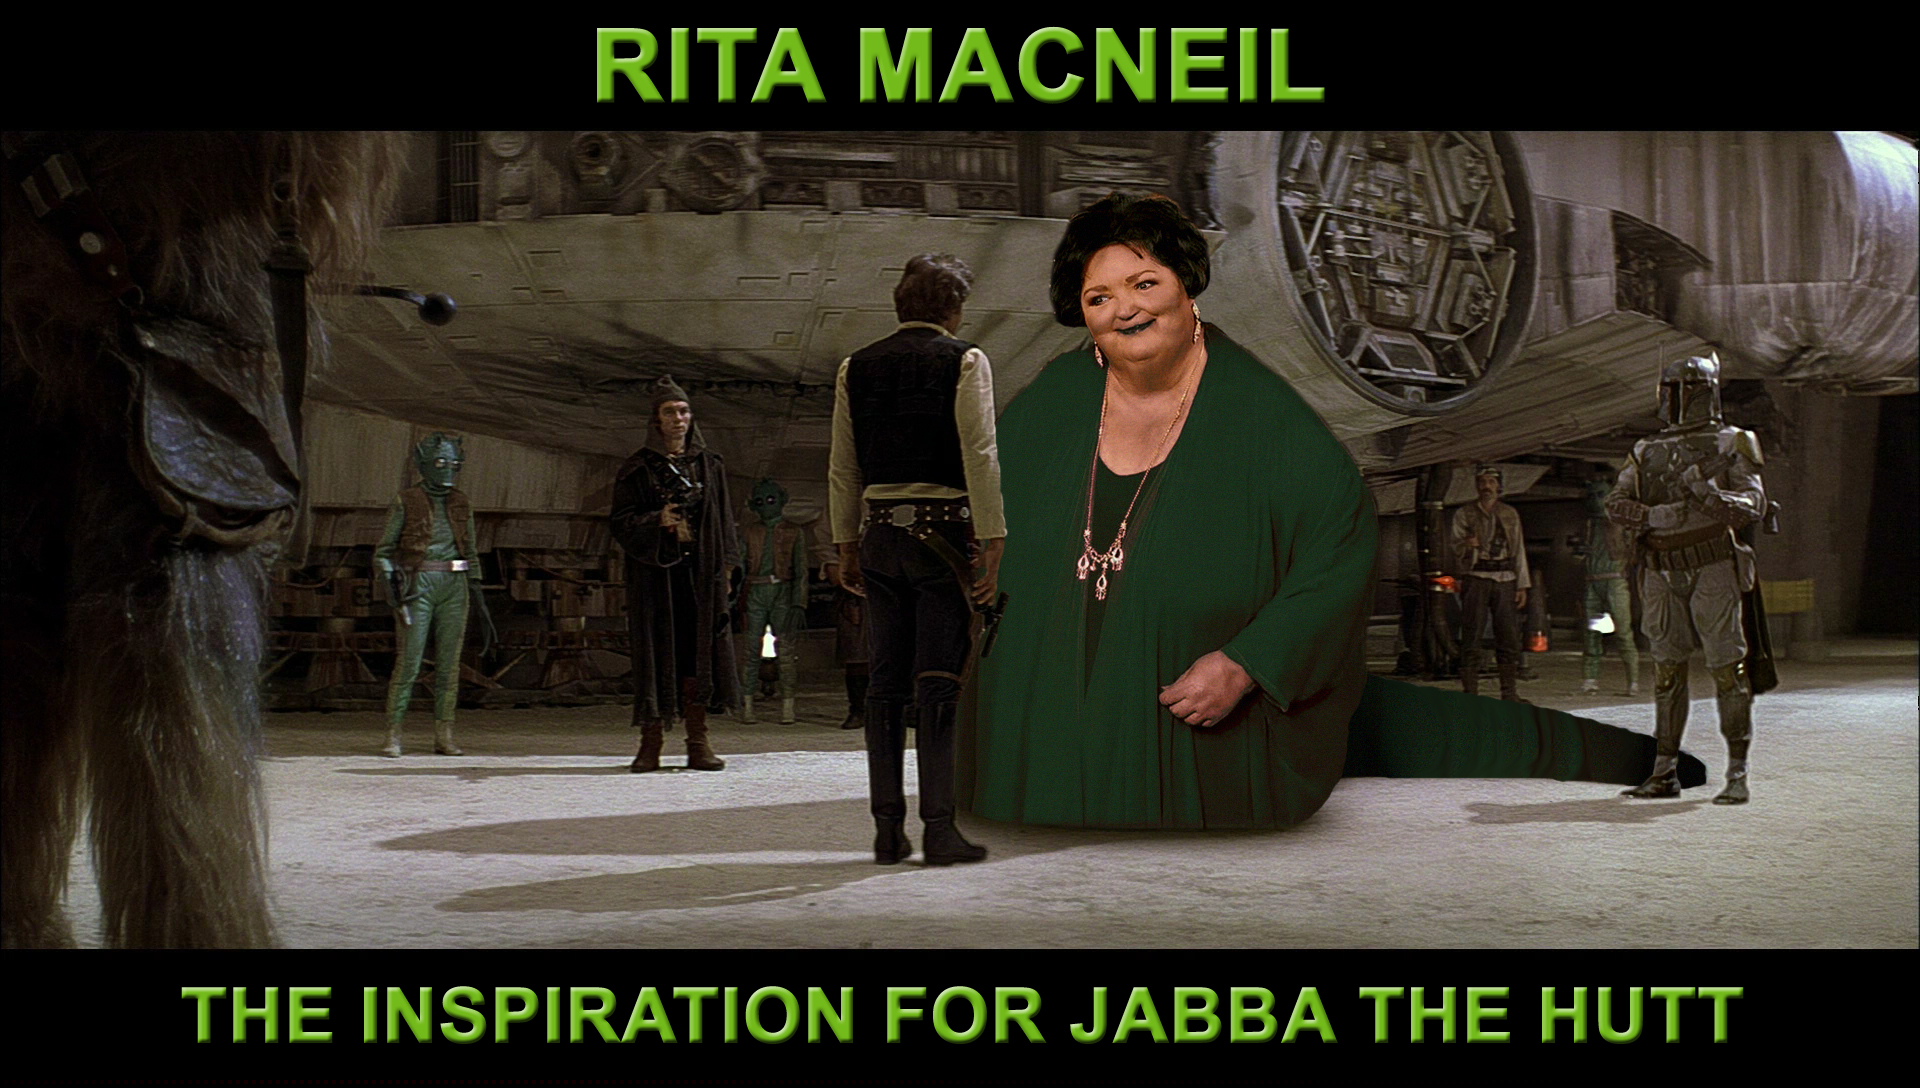 The Canadian Singer Rita Macneil was George Lucas' first choice to play Jabba The Hutt.  He then decided to go with special effects because the budget for Craft Services was getting out of control.